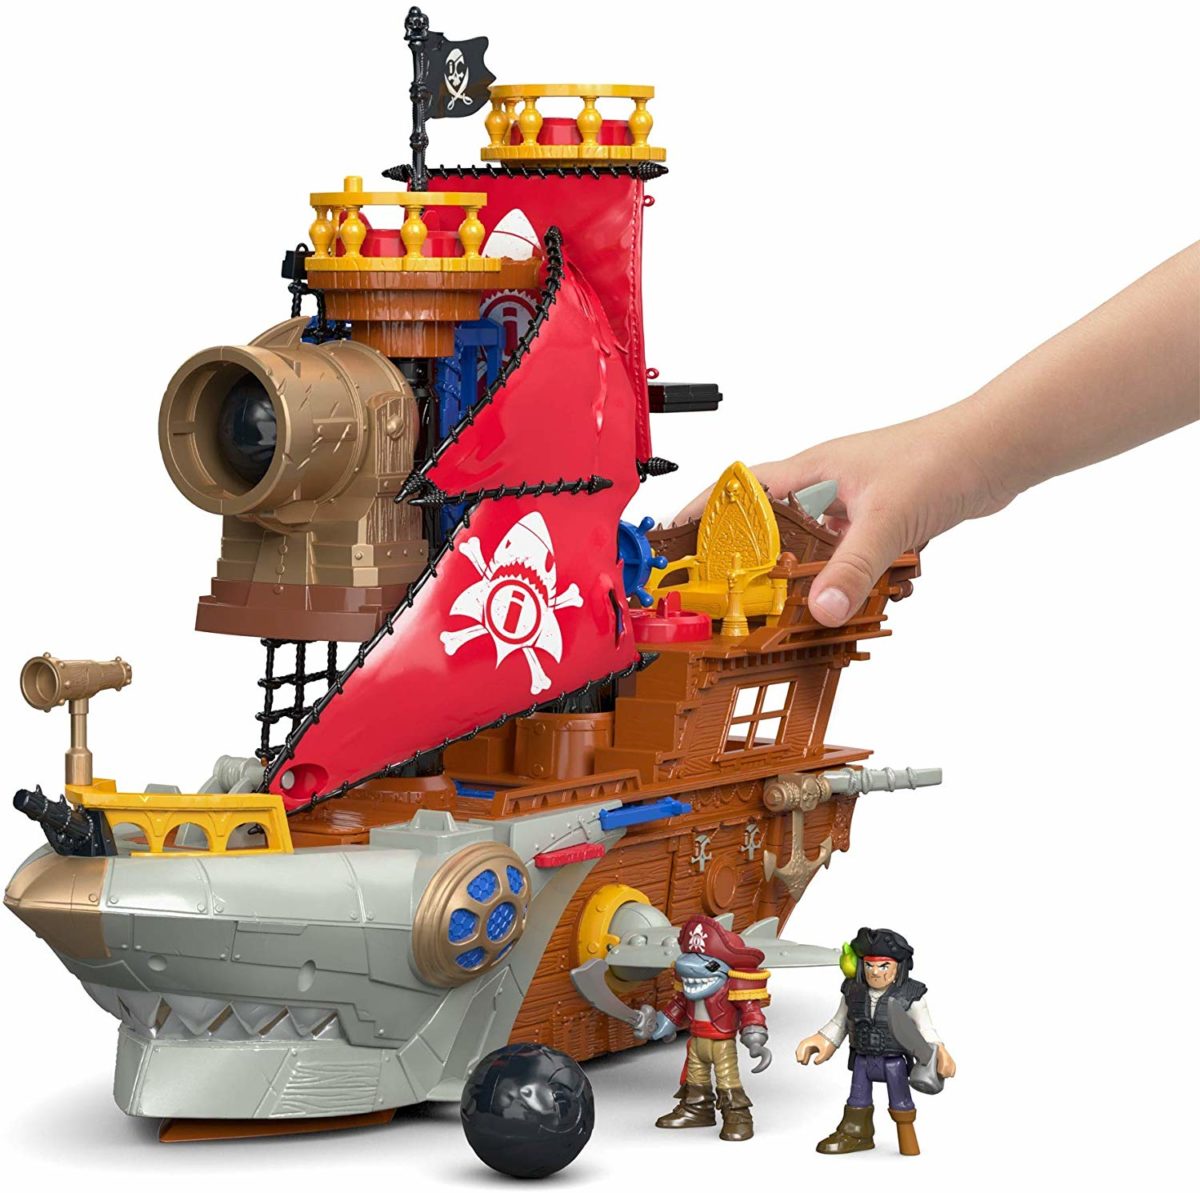 Fisher-Price Imaginext Shark-Bite Pirate Ship - Top Toys and Gifts for Four Year Old Boys 1